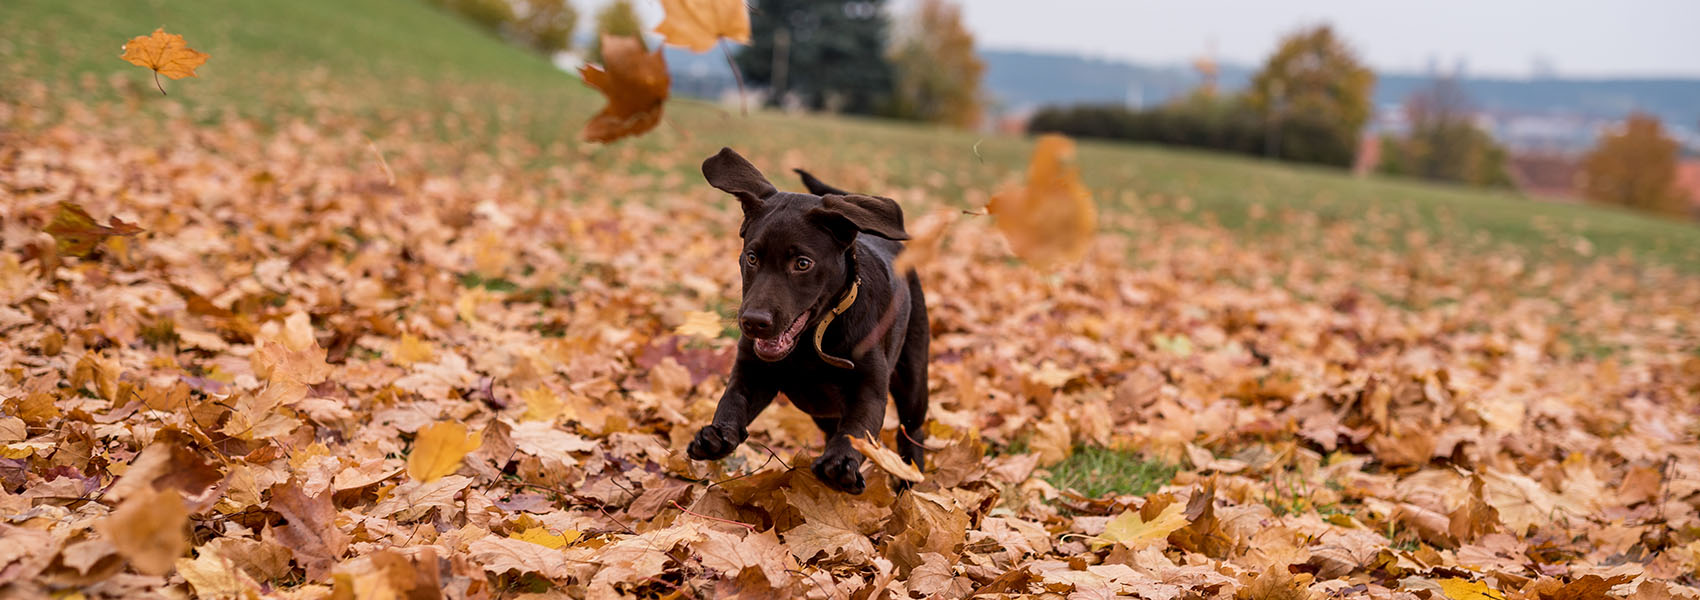 dog playing in pile of fall leaves